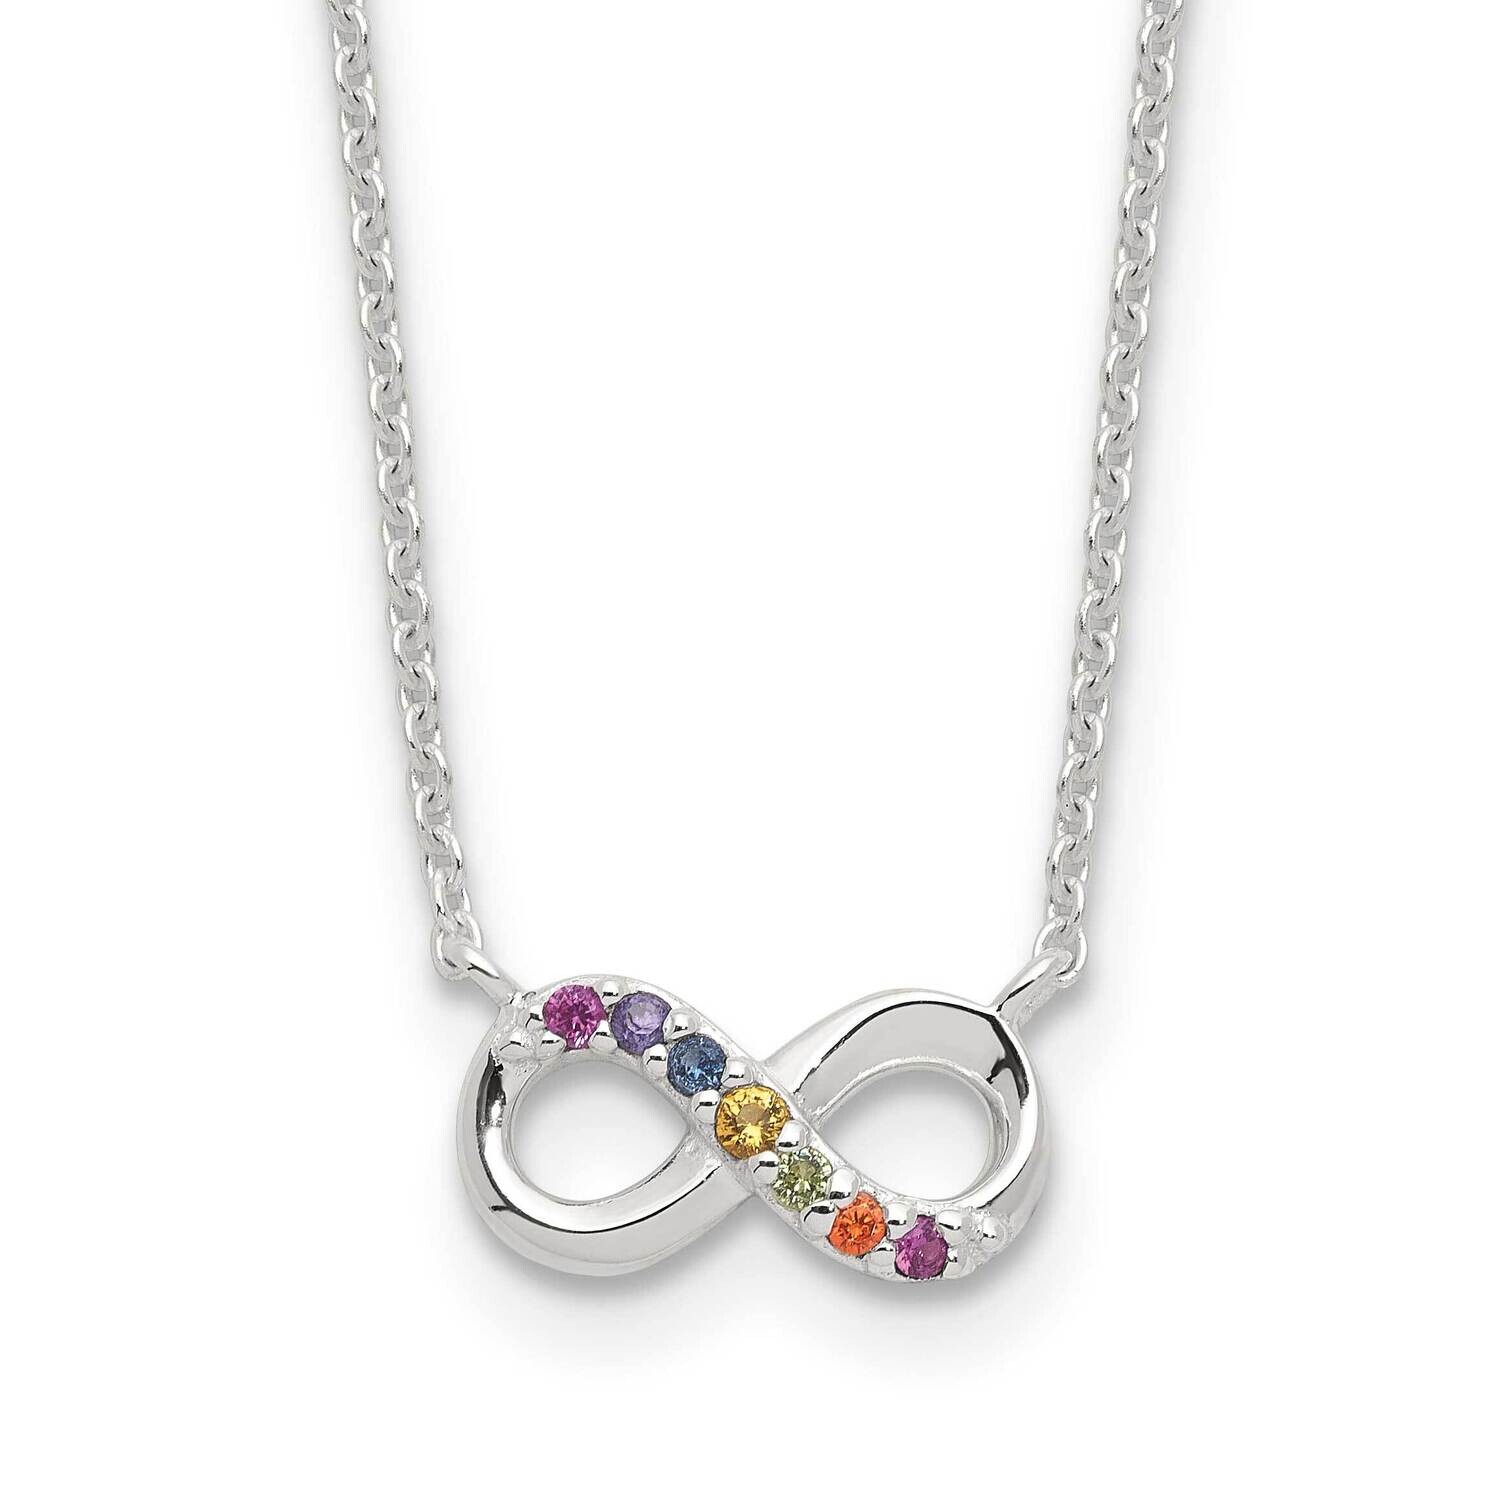 E-Coated Multi Color CZ Infinity 18 Inch 2 Inch Extension Necklace Sterling Silver QG6622-18